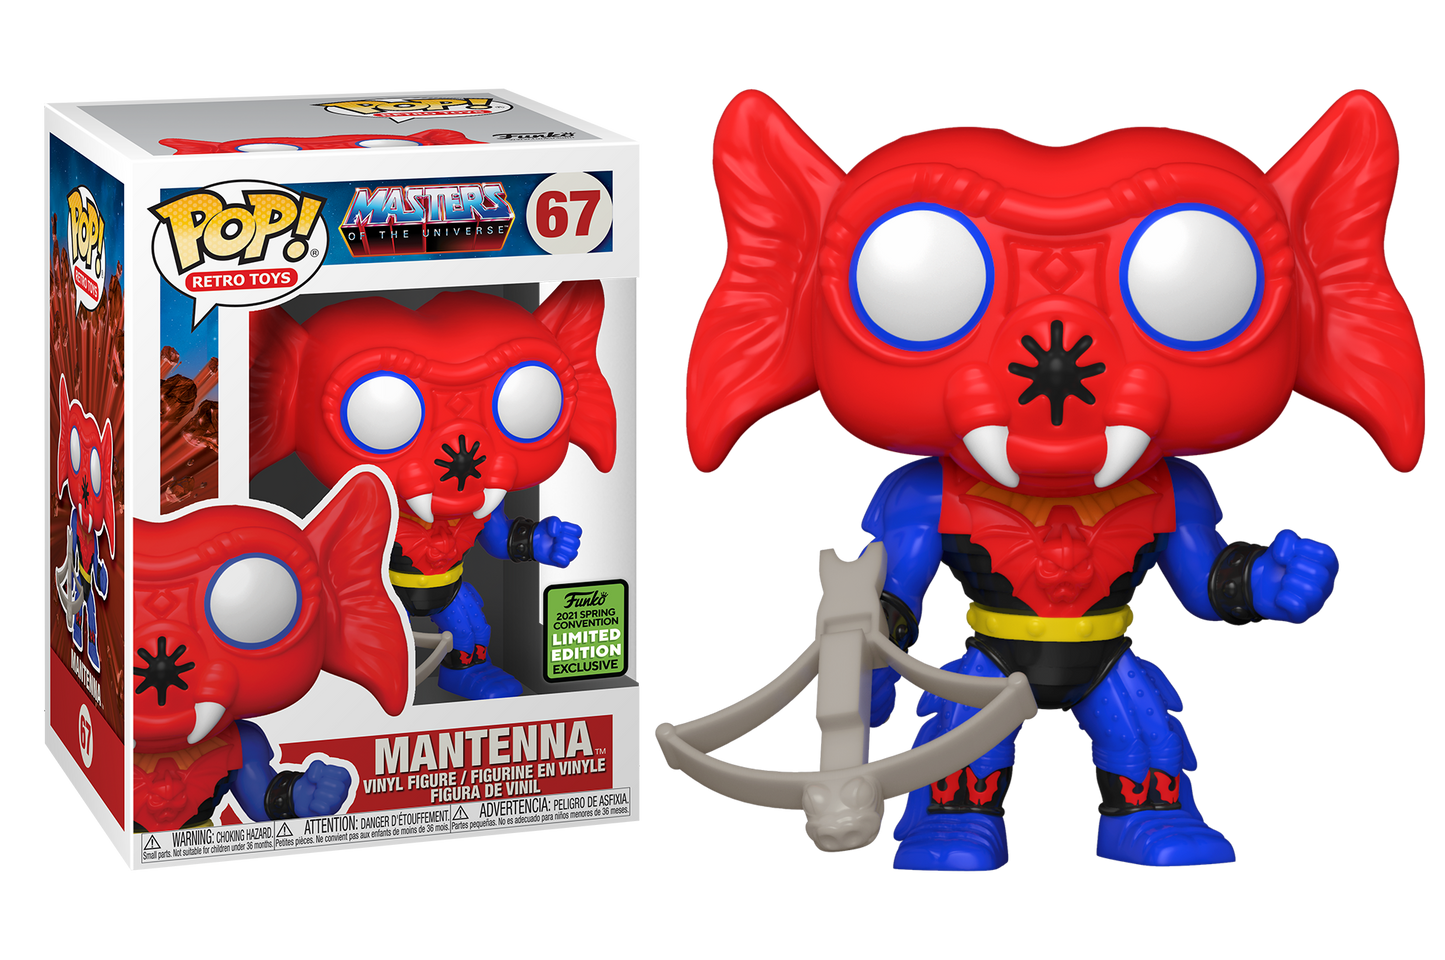 Masters of the Universe - Mantenna ECCC 2021 Spring Convention Exclusive Pop! Vinyl